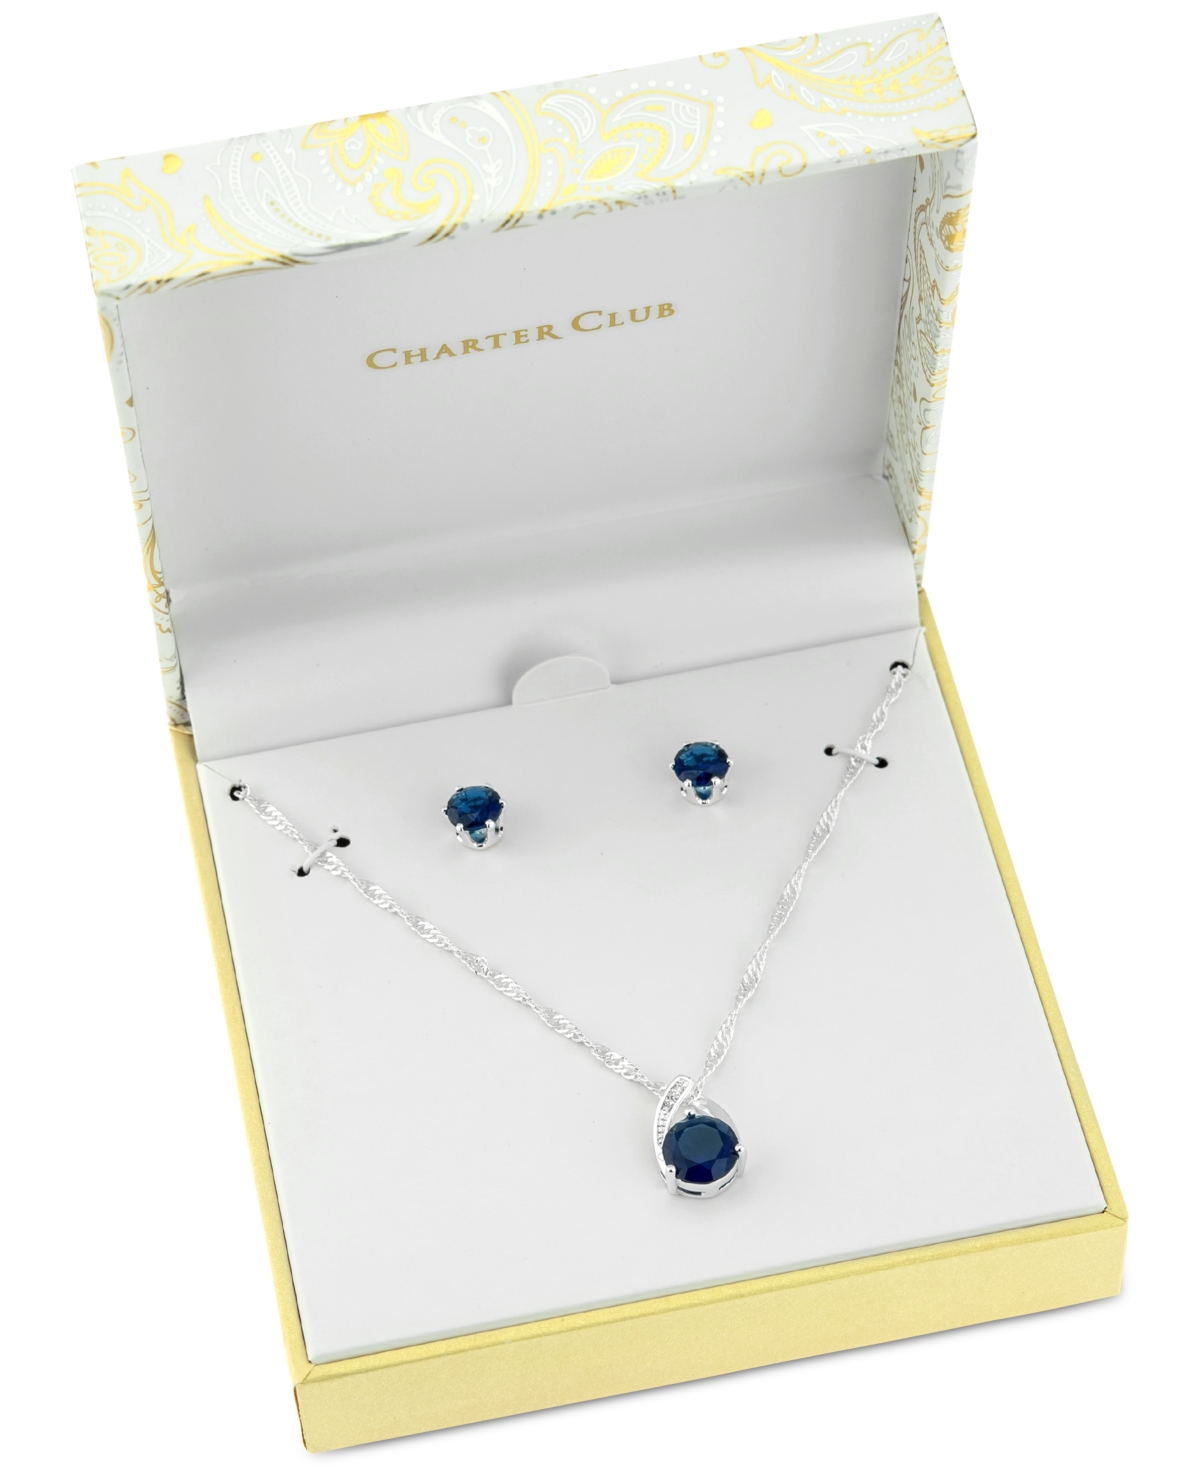 CHARTER CLUB CRYSTAL PENDANT NECKLACE AND EARRINGS SET IN 18K ROSE GOLD PLATE, GOLD PLATE OR FINE SILVER PLATE, C